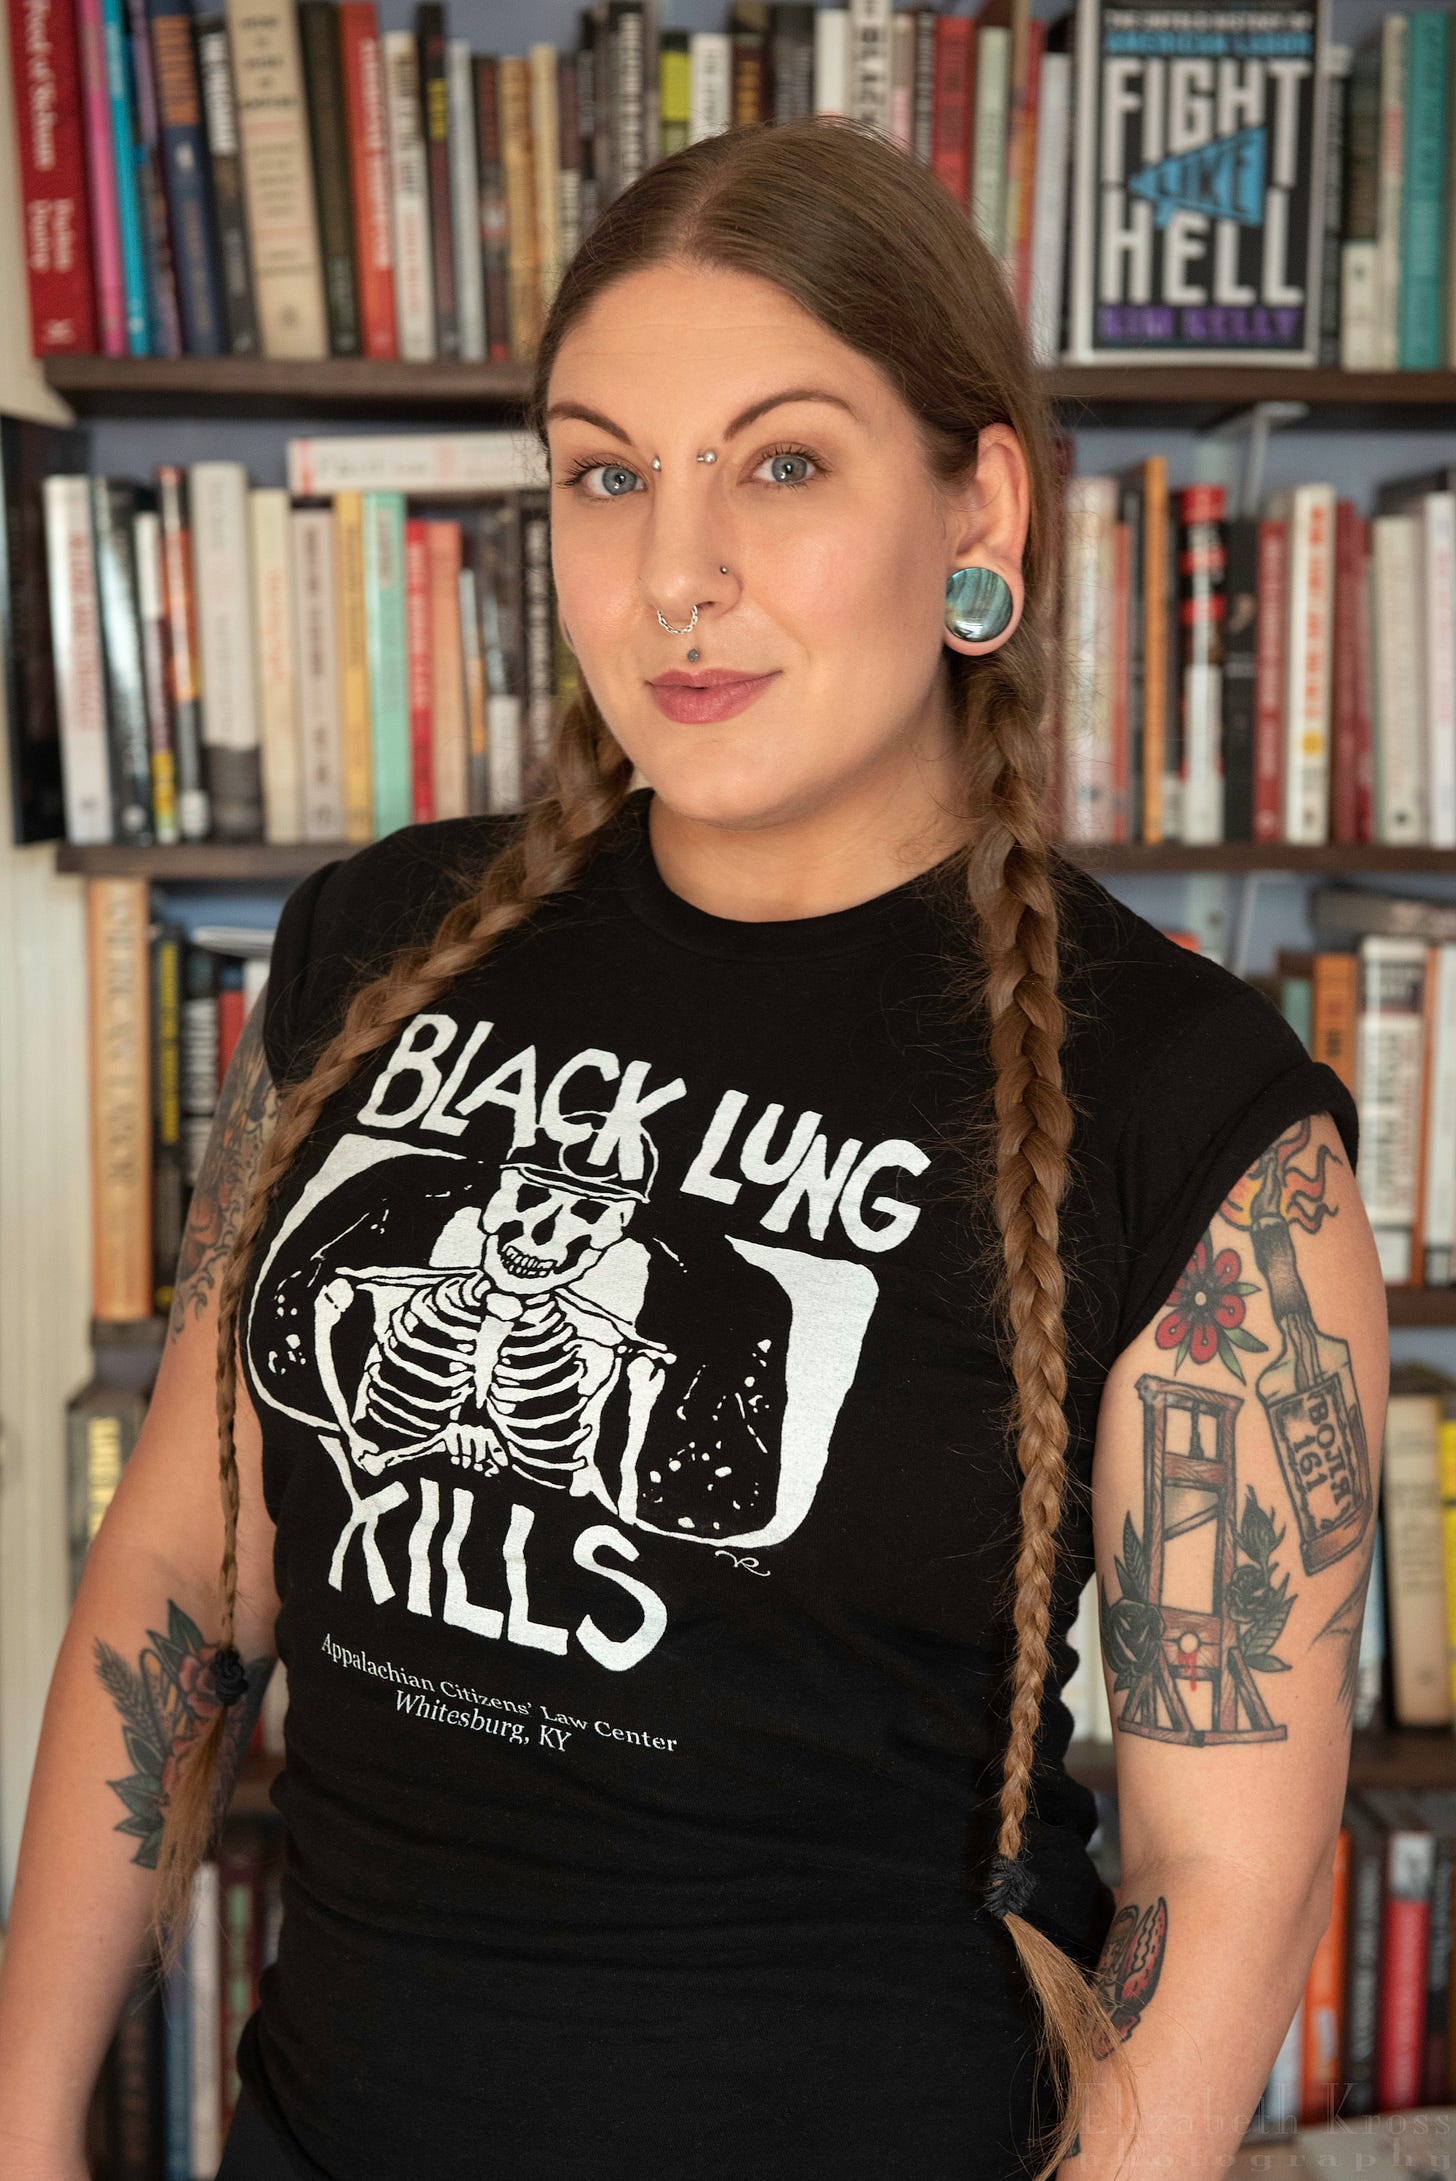 A portrait of Kim Kelly, an author, photographed from the waist up standing in front of a bookshelf with her book, Fight Like Hell, featured prominently but slightly out of focus over her left shoulder. Kim is a white woman with reddish brown hair styled into two French braids. She has numerous facial piercings and tattoos on her arms, including one of a molotov cocktail and another of a guillotine. She is wearing a sleeveless black t-shirt that says “Black Lung Kills” across the chest.